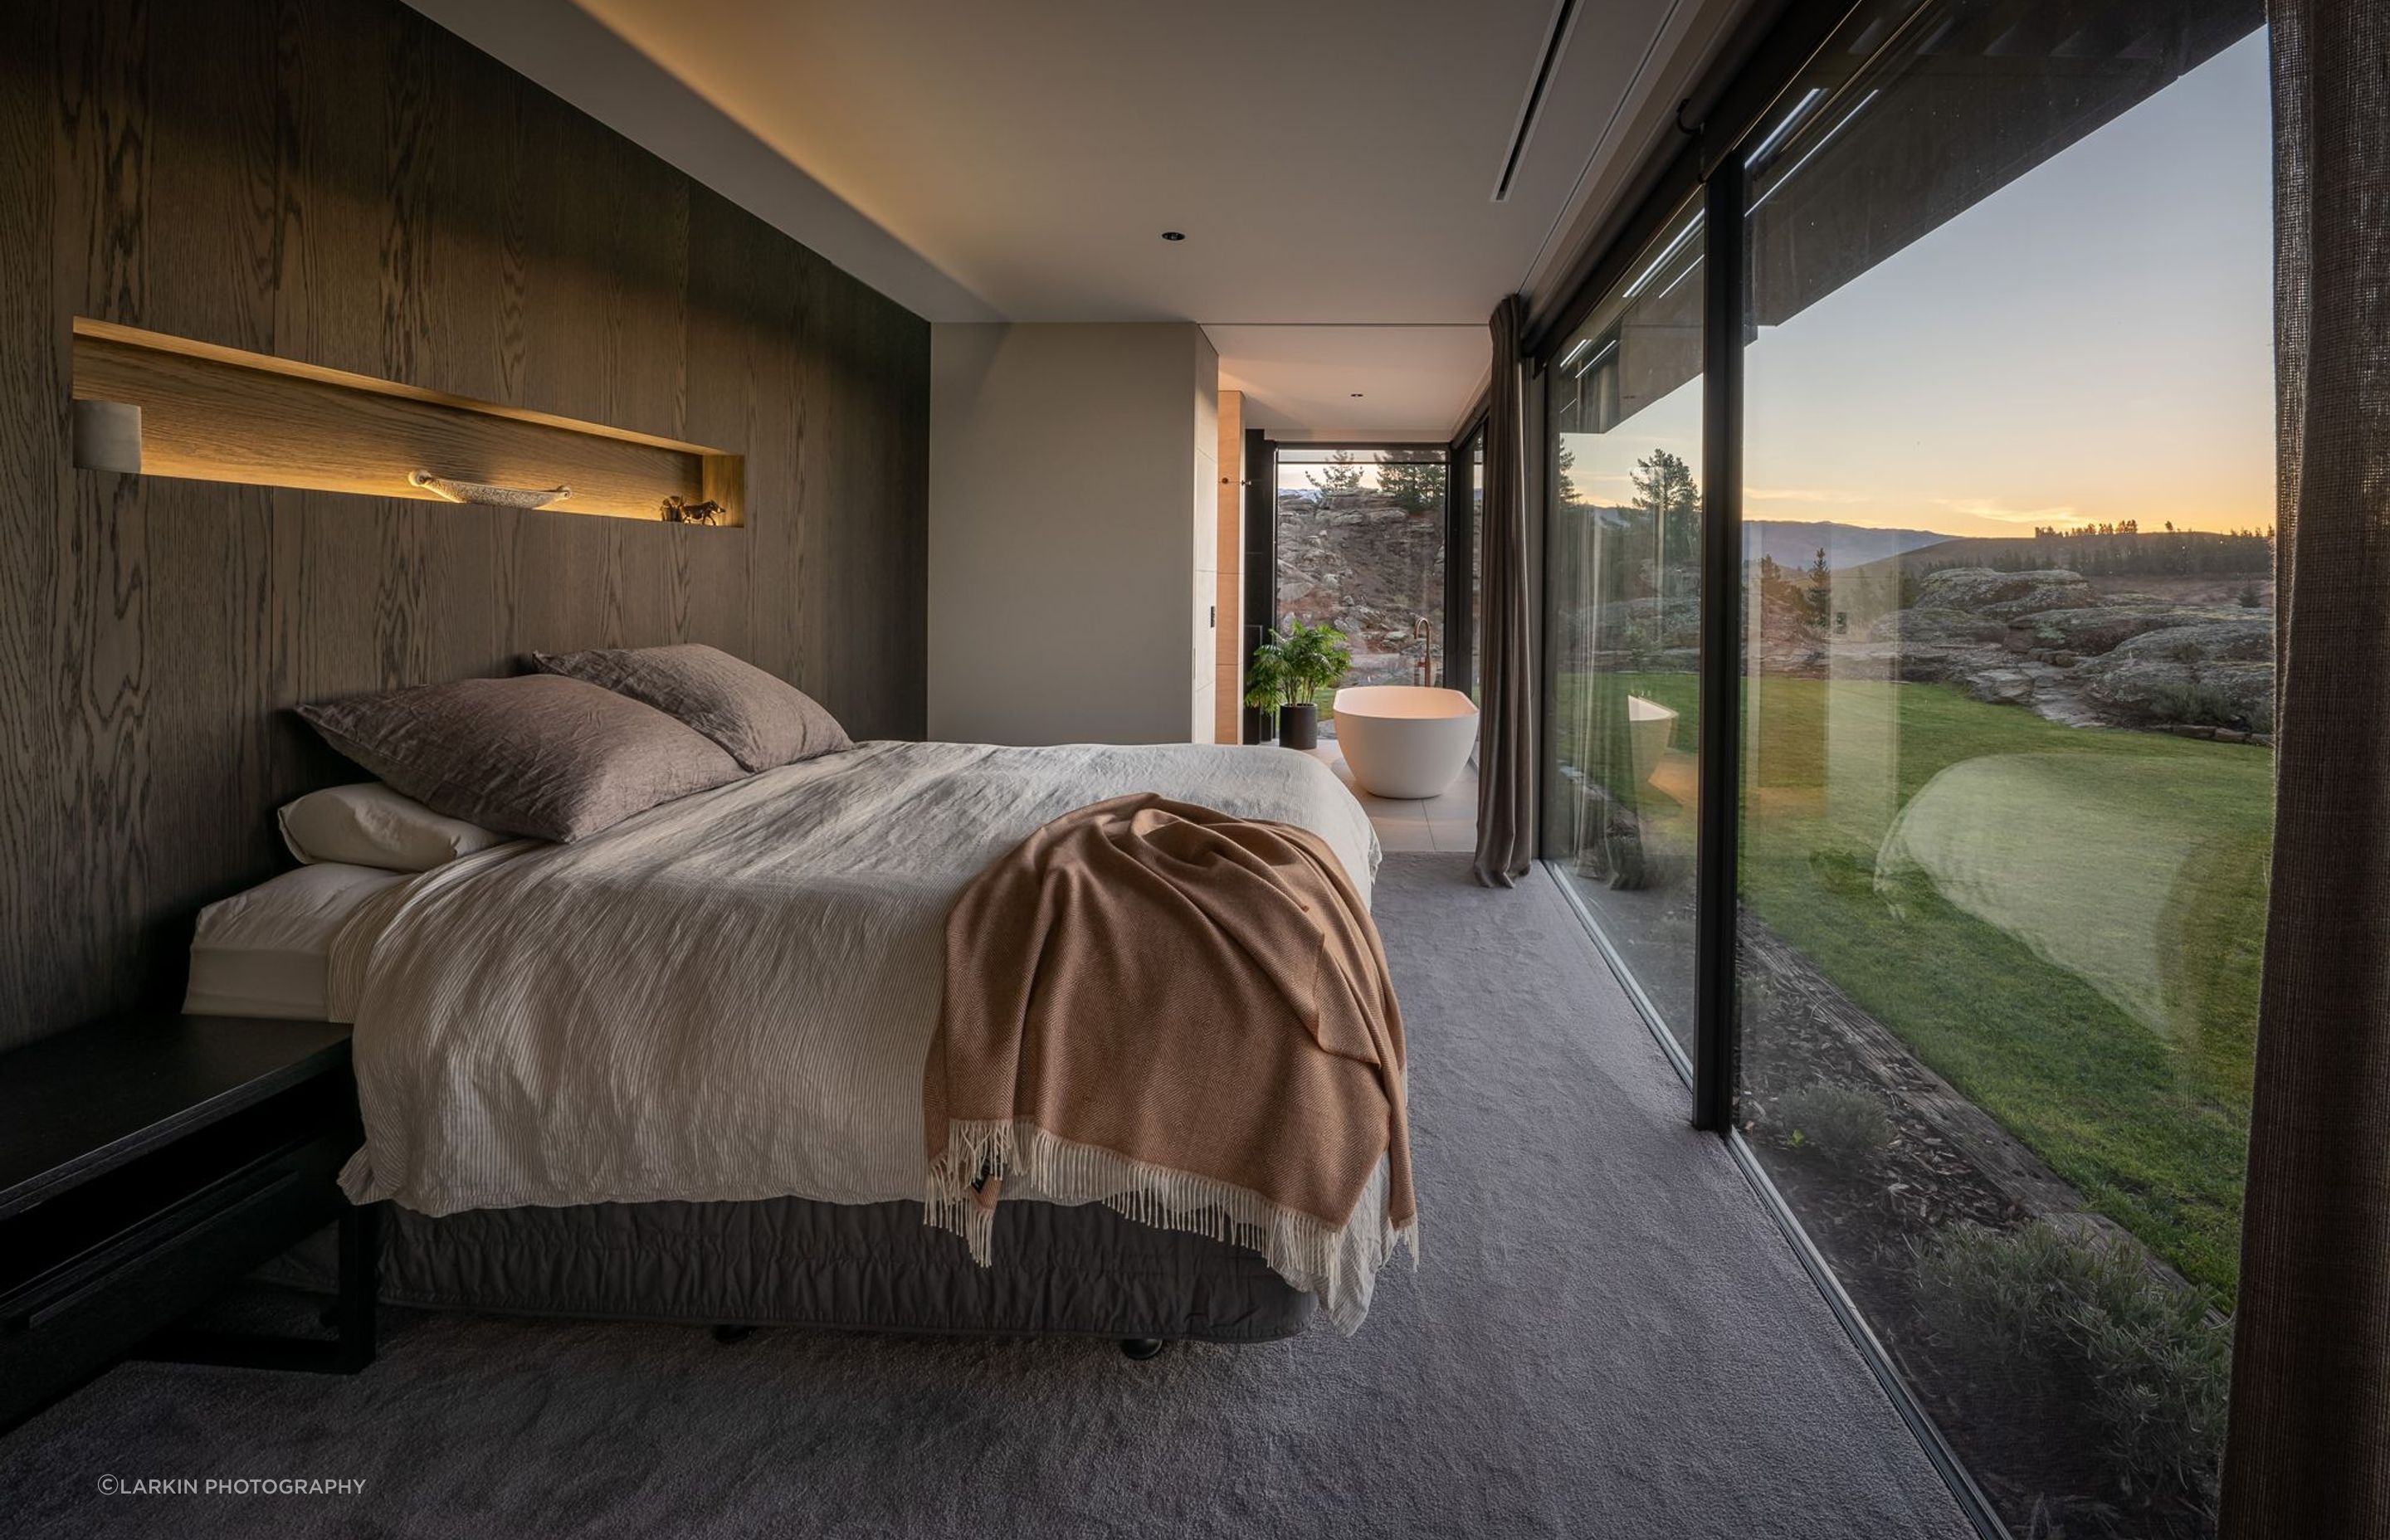 The master bedroom enjoys uninterrupted views through floor-to-ceiling glazing.